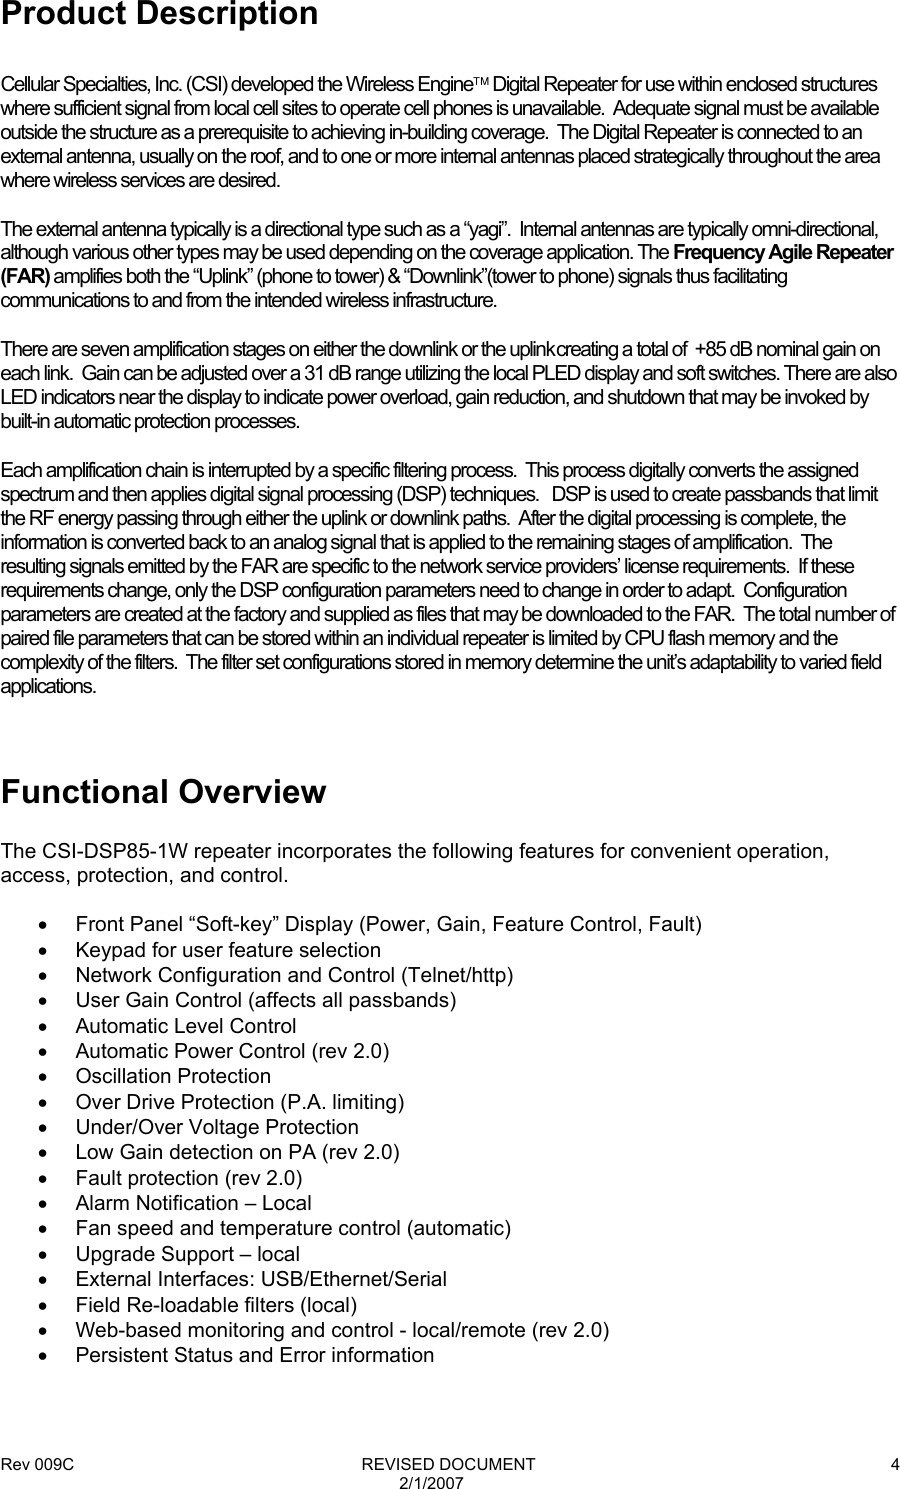 Rev 009C                                                              REVISED DOCUMENT 2/1/2007 4 Product Description  Cellular Specialties, Inc. (CSI) developed the Wireless Engine Digital Repeater for use within enclosed structures where sufficient signal from local cell sites to operate cell phones is unavailable.  Adequate signal must be available outside the structure as a prerequisite to achieving in-building coverage.  The Digital Repeater is connected to an external antenna, usually on the roof, and to one or more internal antennas placed strategically throughout the area where wireless services are desired.  The external antenna typically is a directional type such as a “yagi”.  Internal antennas are typically omni-directional, although various other types may be used depending on the coverage application. The Frequency Agile Repeater (FAR) amplifies both the “Uplink” (phone to tower) &amp; “Downlink”(tower to phone) signals thus facilitating communications to and from the intended wireless infrastructure. There are seven amplification stages on either the downlink or the uplink creating a total of  +85 dB nominal gain on each link.  Gain can be adjusted over a 31 dB range utilizing the local PLED display and soft switches. There are also LED indicators near the display to indicate power overload, gain reduction, and shutdown that may be invoked by built-in automatic protection processes. Each amplification chain is interrupted by a specific filtering process.  This process digitally converts the assigned spectrum and then applies digital signal processing (DSP) techniques.   DSP is used to create passbands that limit the RF energy passing through either the uplink or downlink paths.  After the digital processing is complete, the information is converted back to an analog signal that is applied to the remaining stages of amplification.  The resulting signals emitted by the FAR are specific to the network service providers’ license requirements.  If these requirements change, only the DSP configuration parameters need to change in order to adapt.  Configuration parameters are created at the factory and supplied as files that may be downloaded to the FAR.  The total number of paired file parameters that can be stored within an individual repeater is limited by CPU flash memory and the complexity of the filters.  The filter set configurations stored in memory determine the unit’s adaptability to varied field applications.  Functional Overview  The CSI-DSP85-1W repeater incorporates the following features for convenient operation, access, protection, and control.  •  Front Panel “Soft-key” Display (Power, Gain, Feature Control, Fault) •  Keypad for user feature selection •  Network Configuration and Control (Telnet/http) •  User Gain Control (affects all passbands) •  Automatic Level Control •  Automatic Power Control (rev 2.0) • Oscillation Protection •  Over Drive Protection (P.A. limiting) •  Under/Over Voltage Protection •  Low Gain detection on PA (rev 2.0) •  Fault protection (rev 2.0) •  Alarm Notification – Local •  Fan speed and temperature control (automatic) •  Upgrade Support – local • External Interfaces: USB/Ethernet/Serial •  Field Re-loadable filters (local) •  Web-based monitoring and control - local/remote (rev 2.0) •  Persistent Status and Error information  